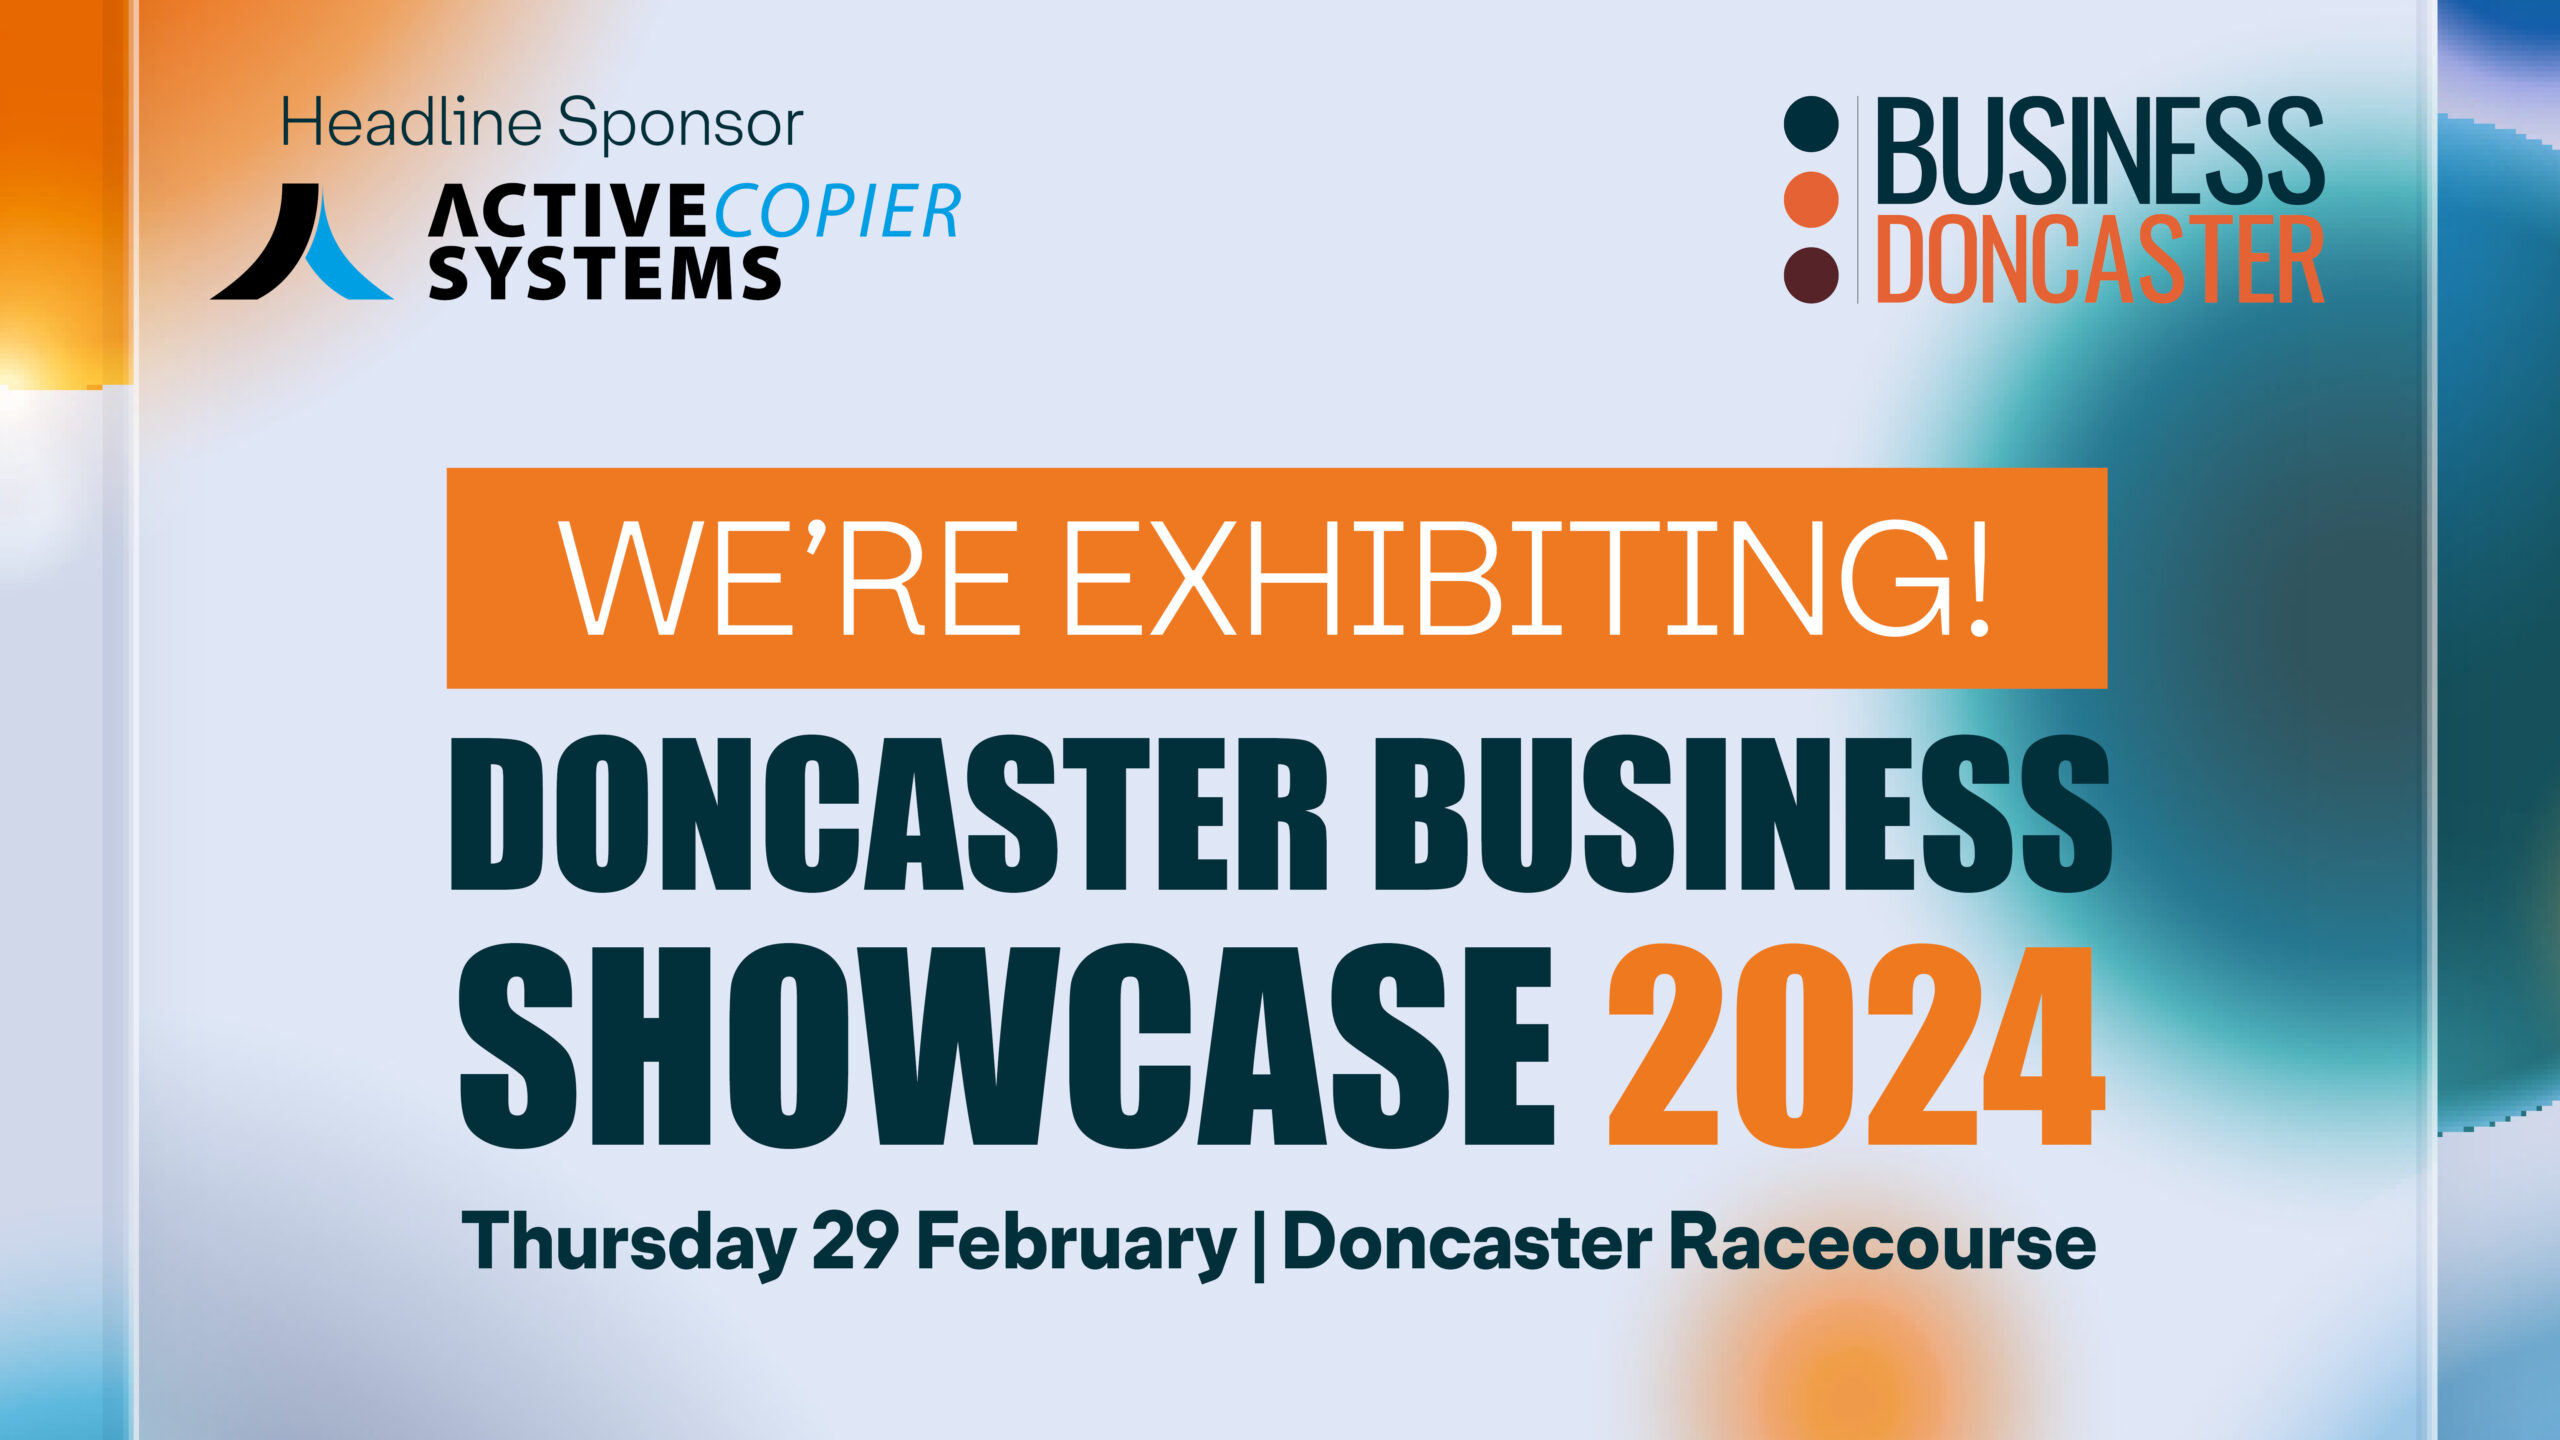 Eurosafe is exhibiting at Business Doncaster Showcase 2024